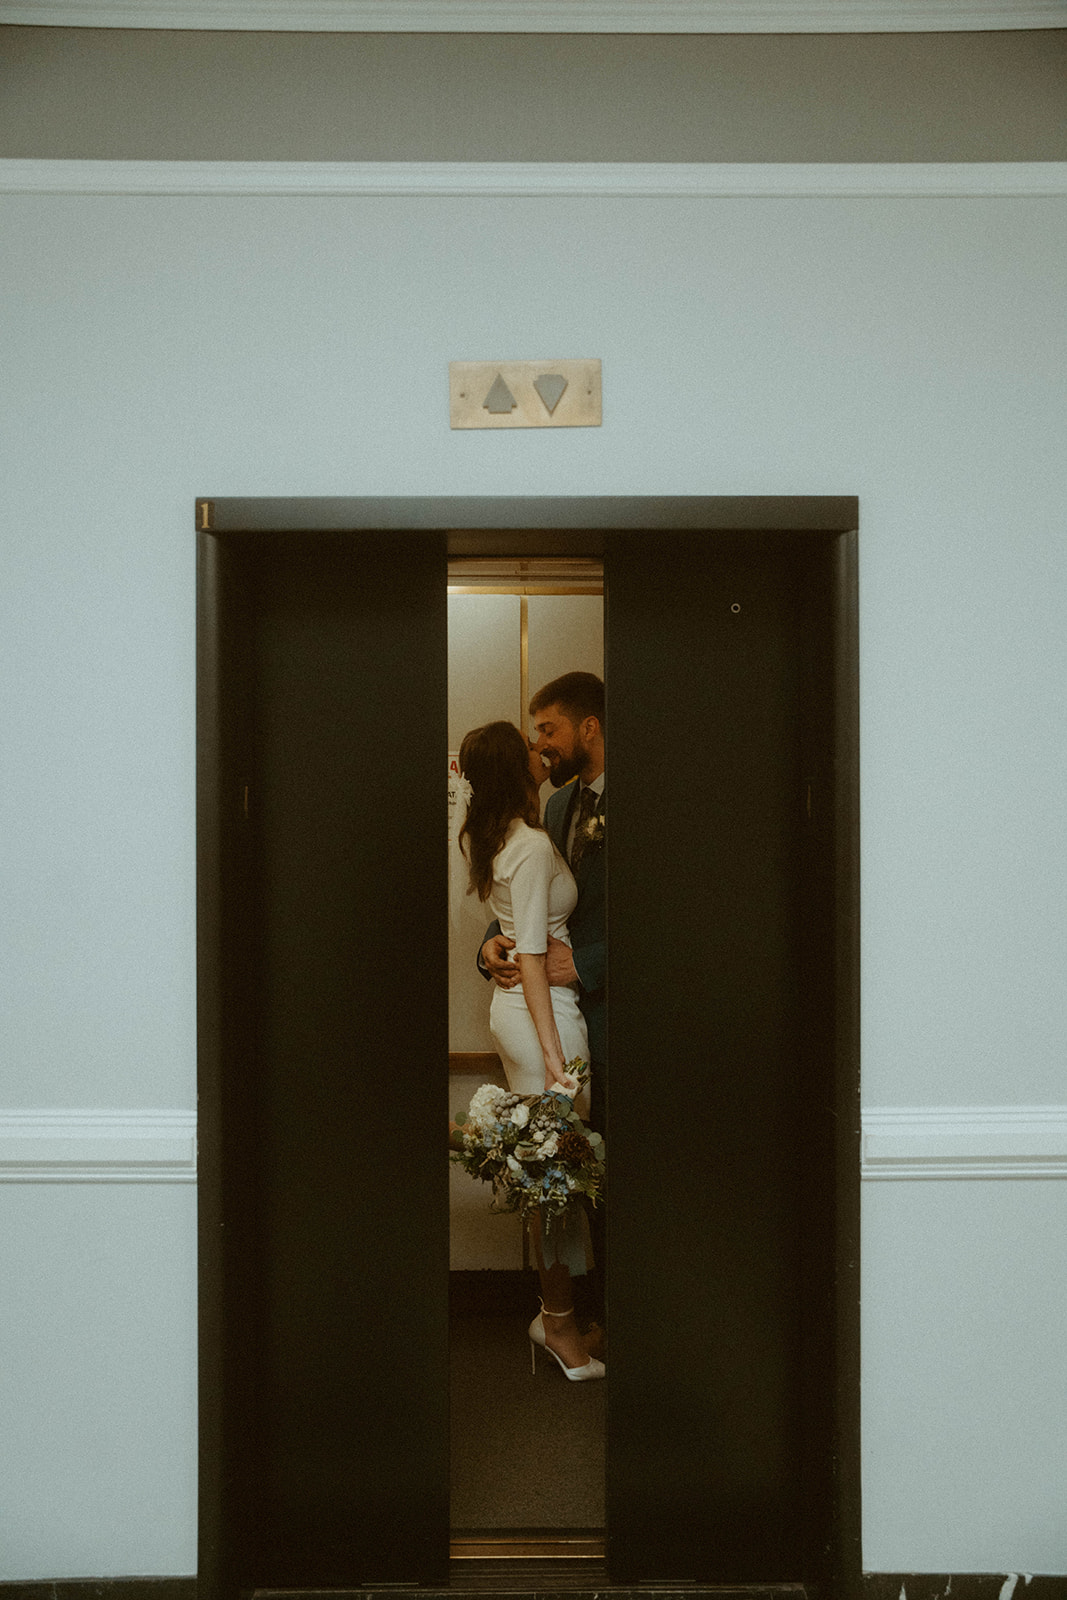 Hailey and Derrick's Vintage Esque Elopement in Downtown Carlisle